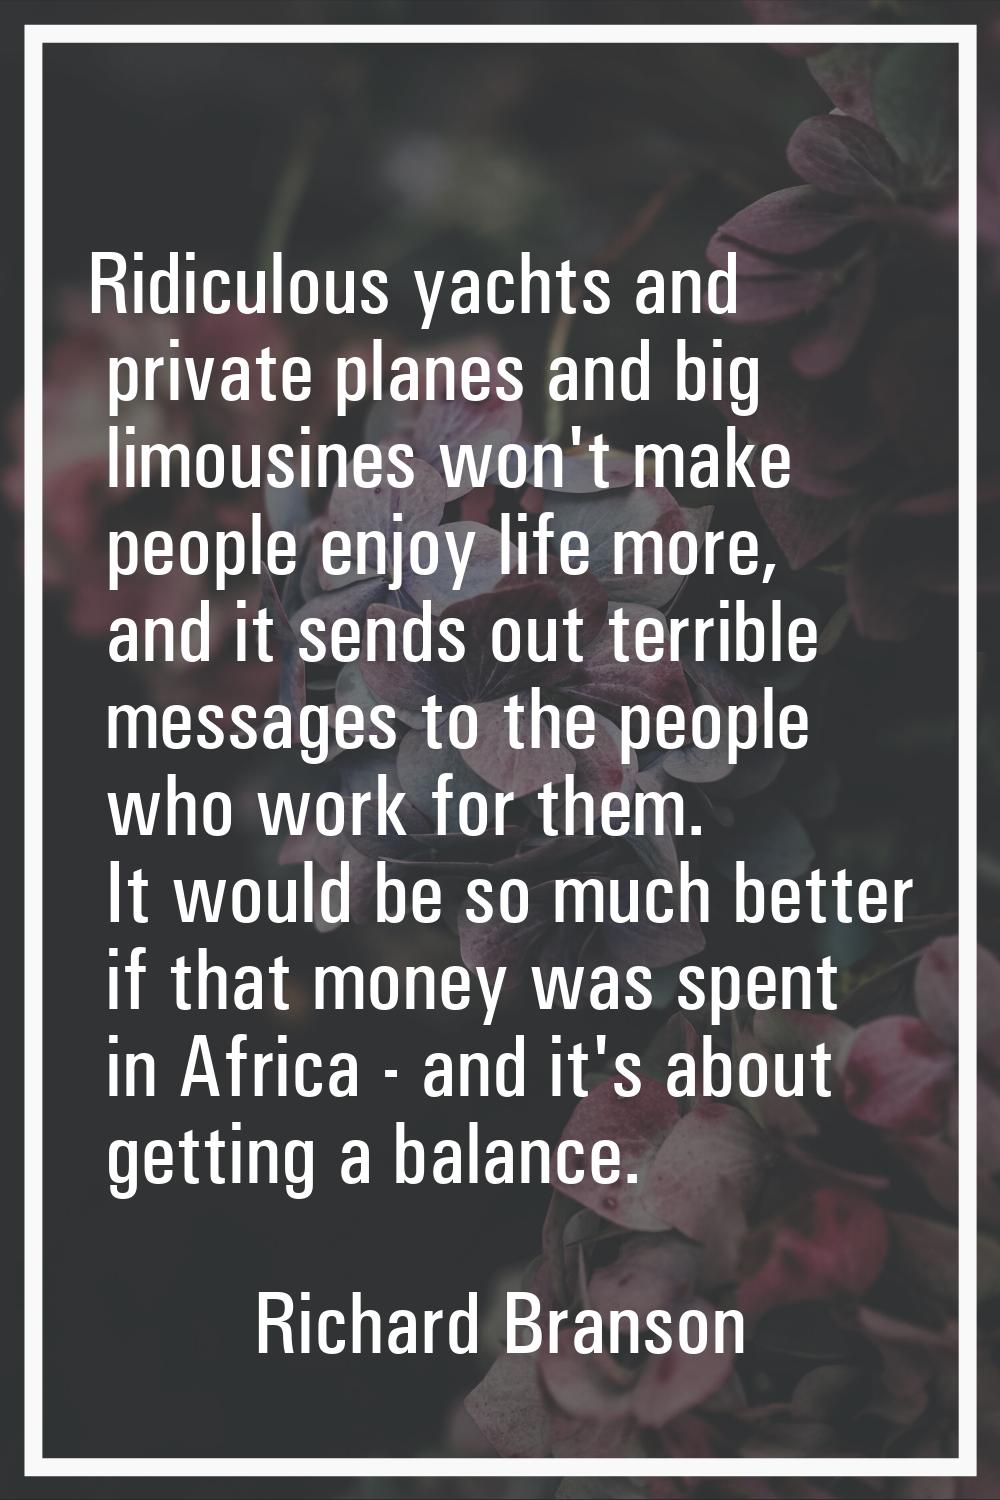 Ridiculous yachts and private planes and big limousines won't make people enjoy life more, and it s